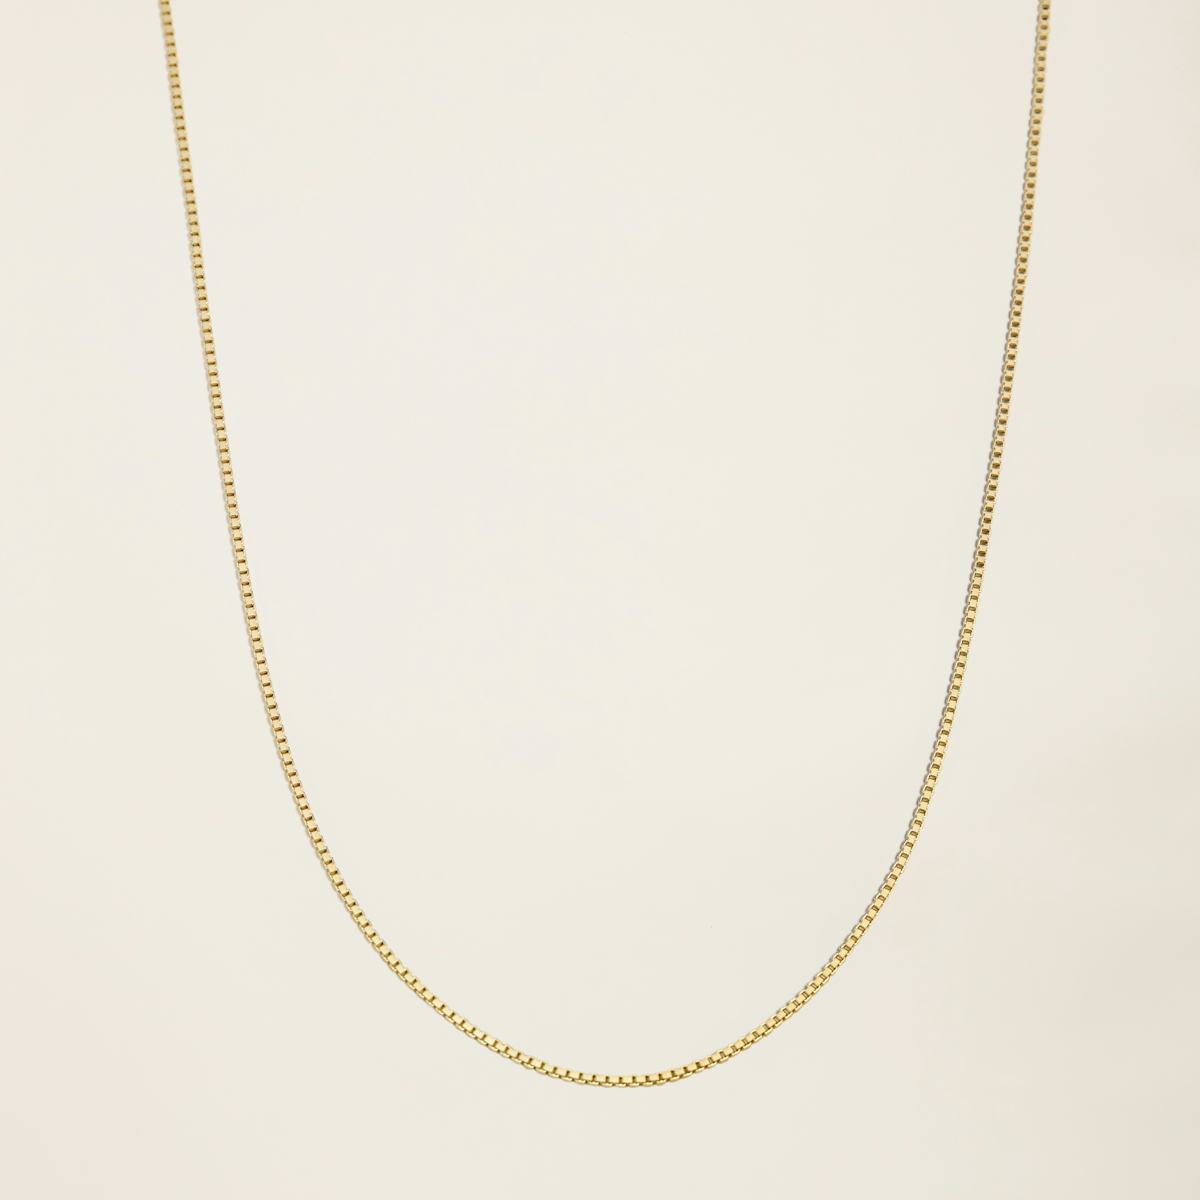 14K Gold Box Chain Necklace - 16__A_6235_Edited_Edited.jpg